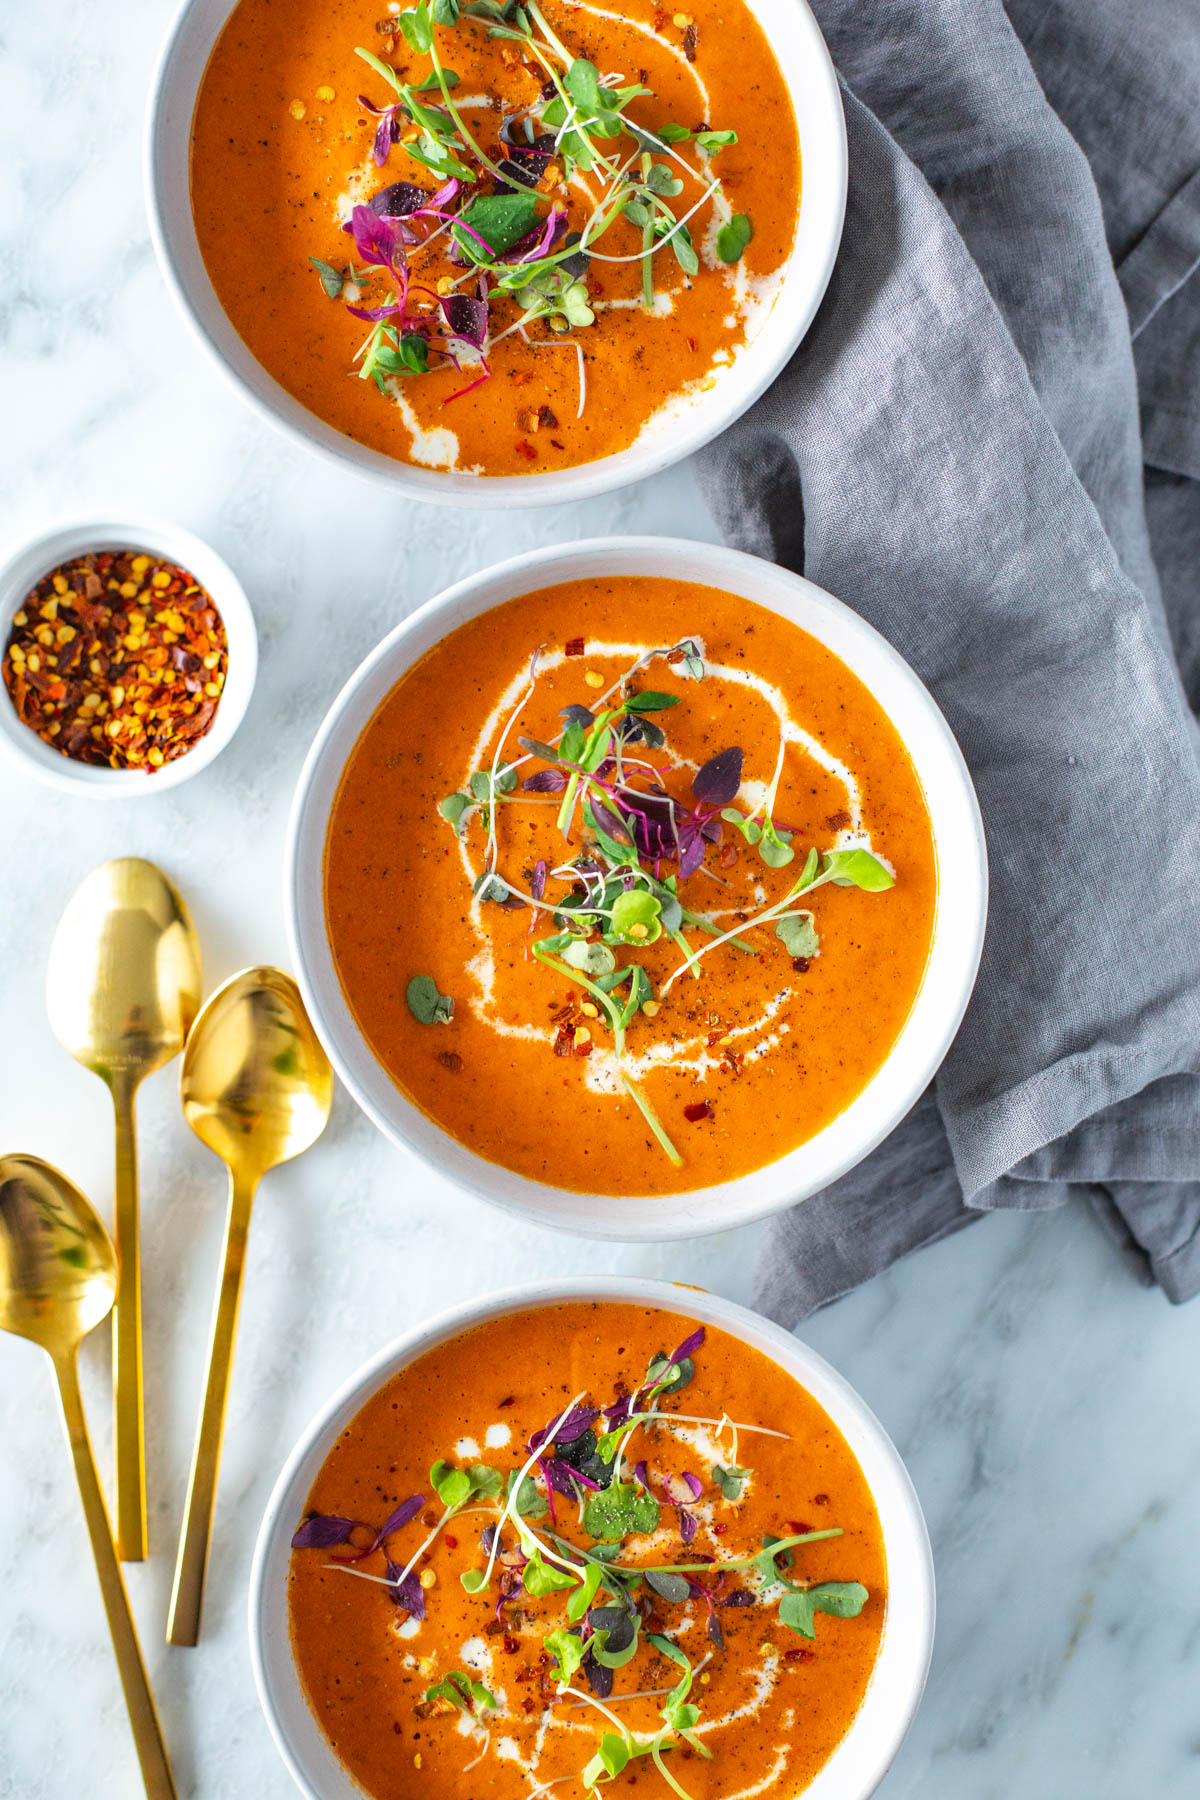 Bowls of roasted red pepper soup with gold spoons on the side